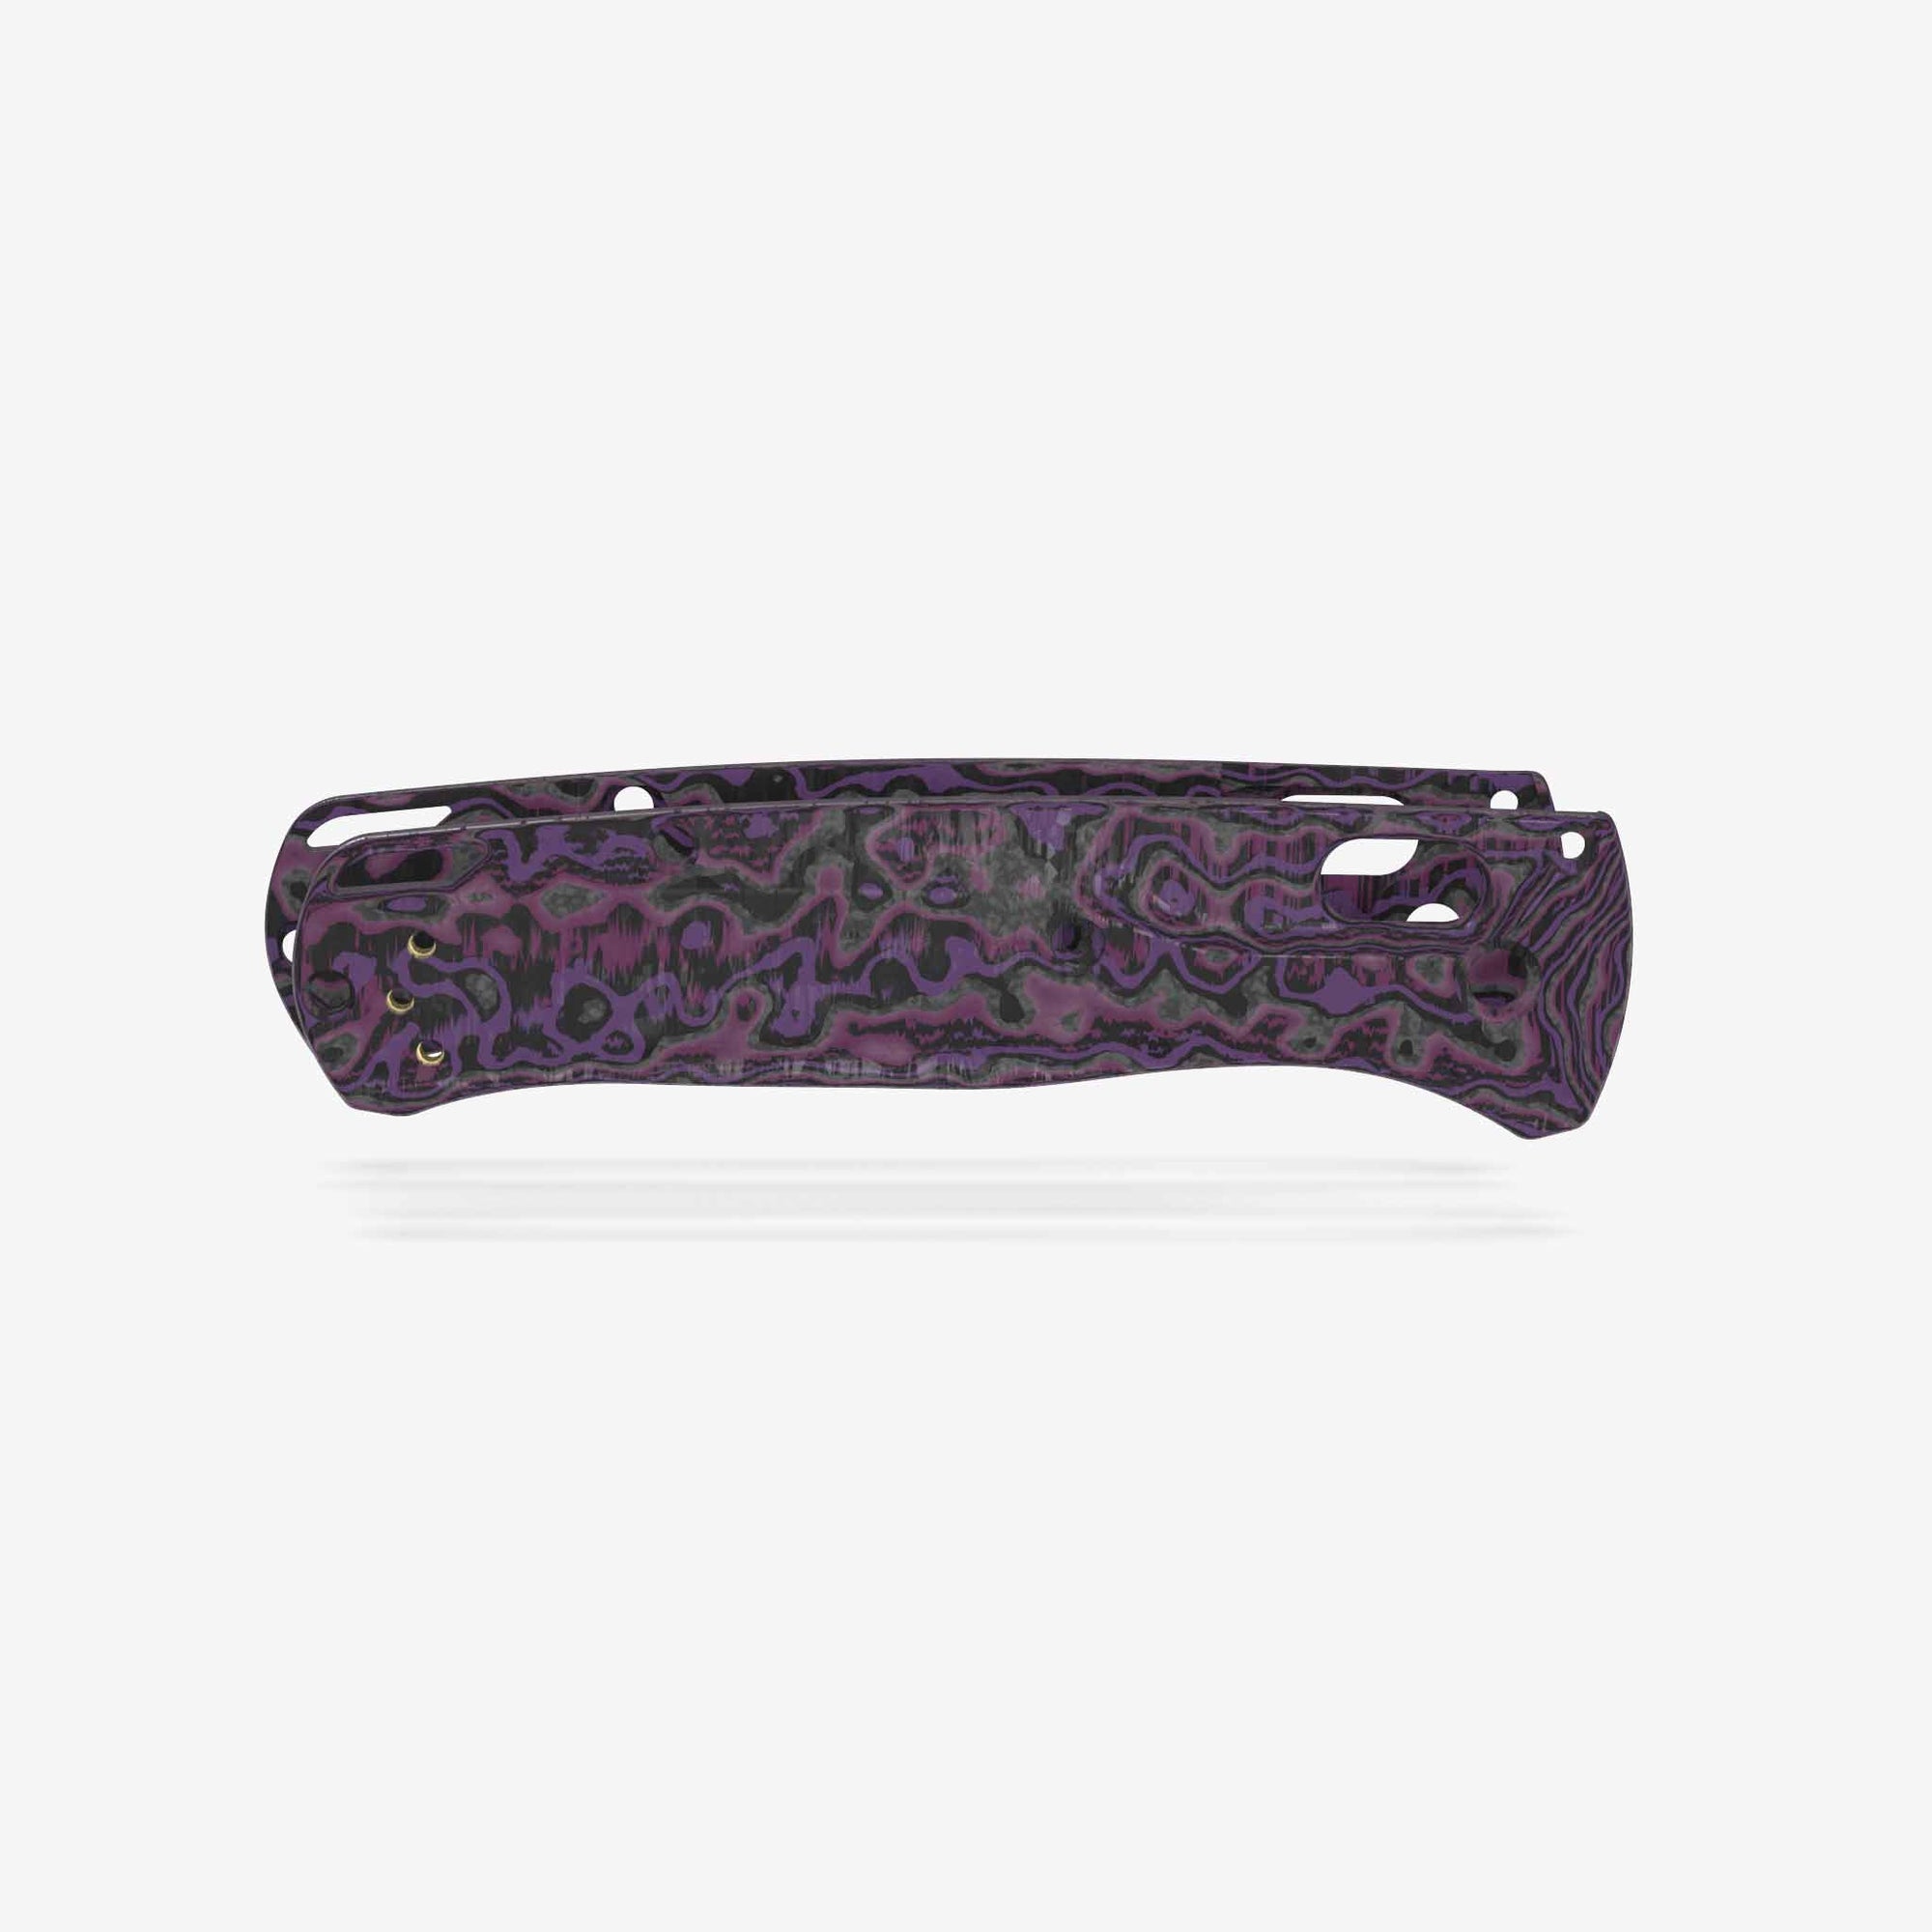 Carbon Fiber Crossfade Scales for Benchmade Bugout Knife